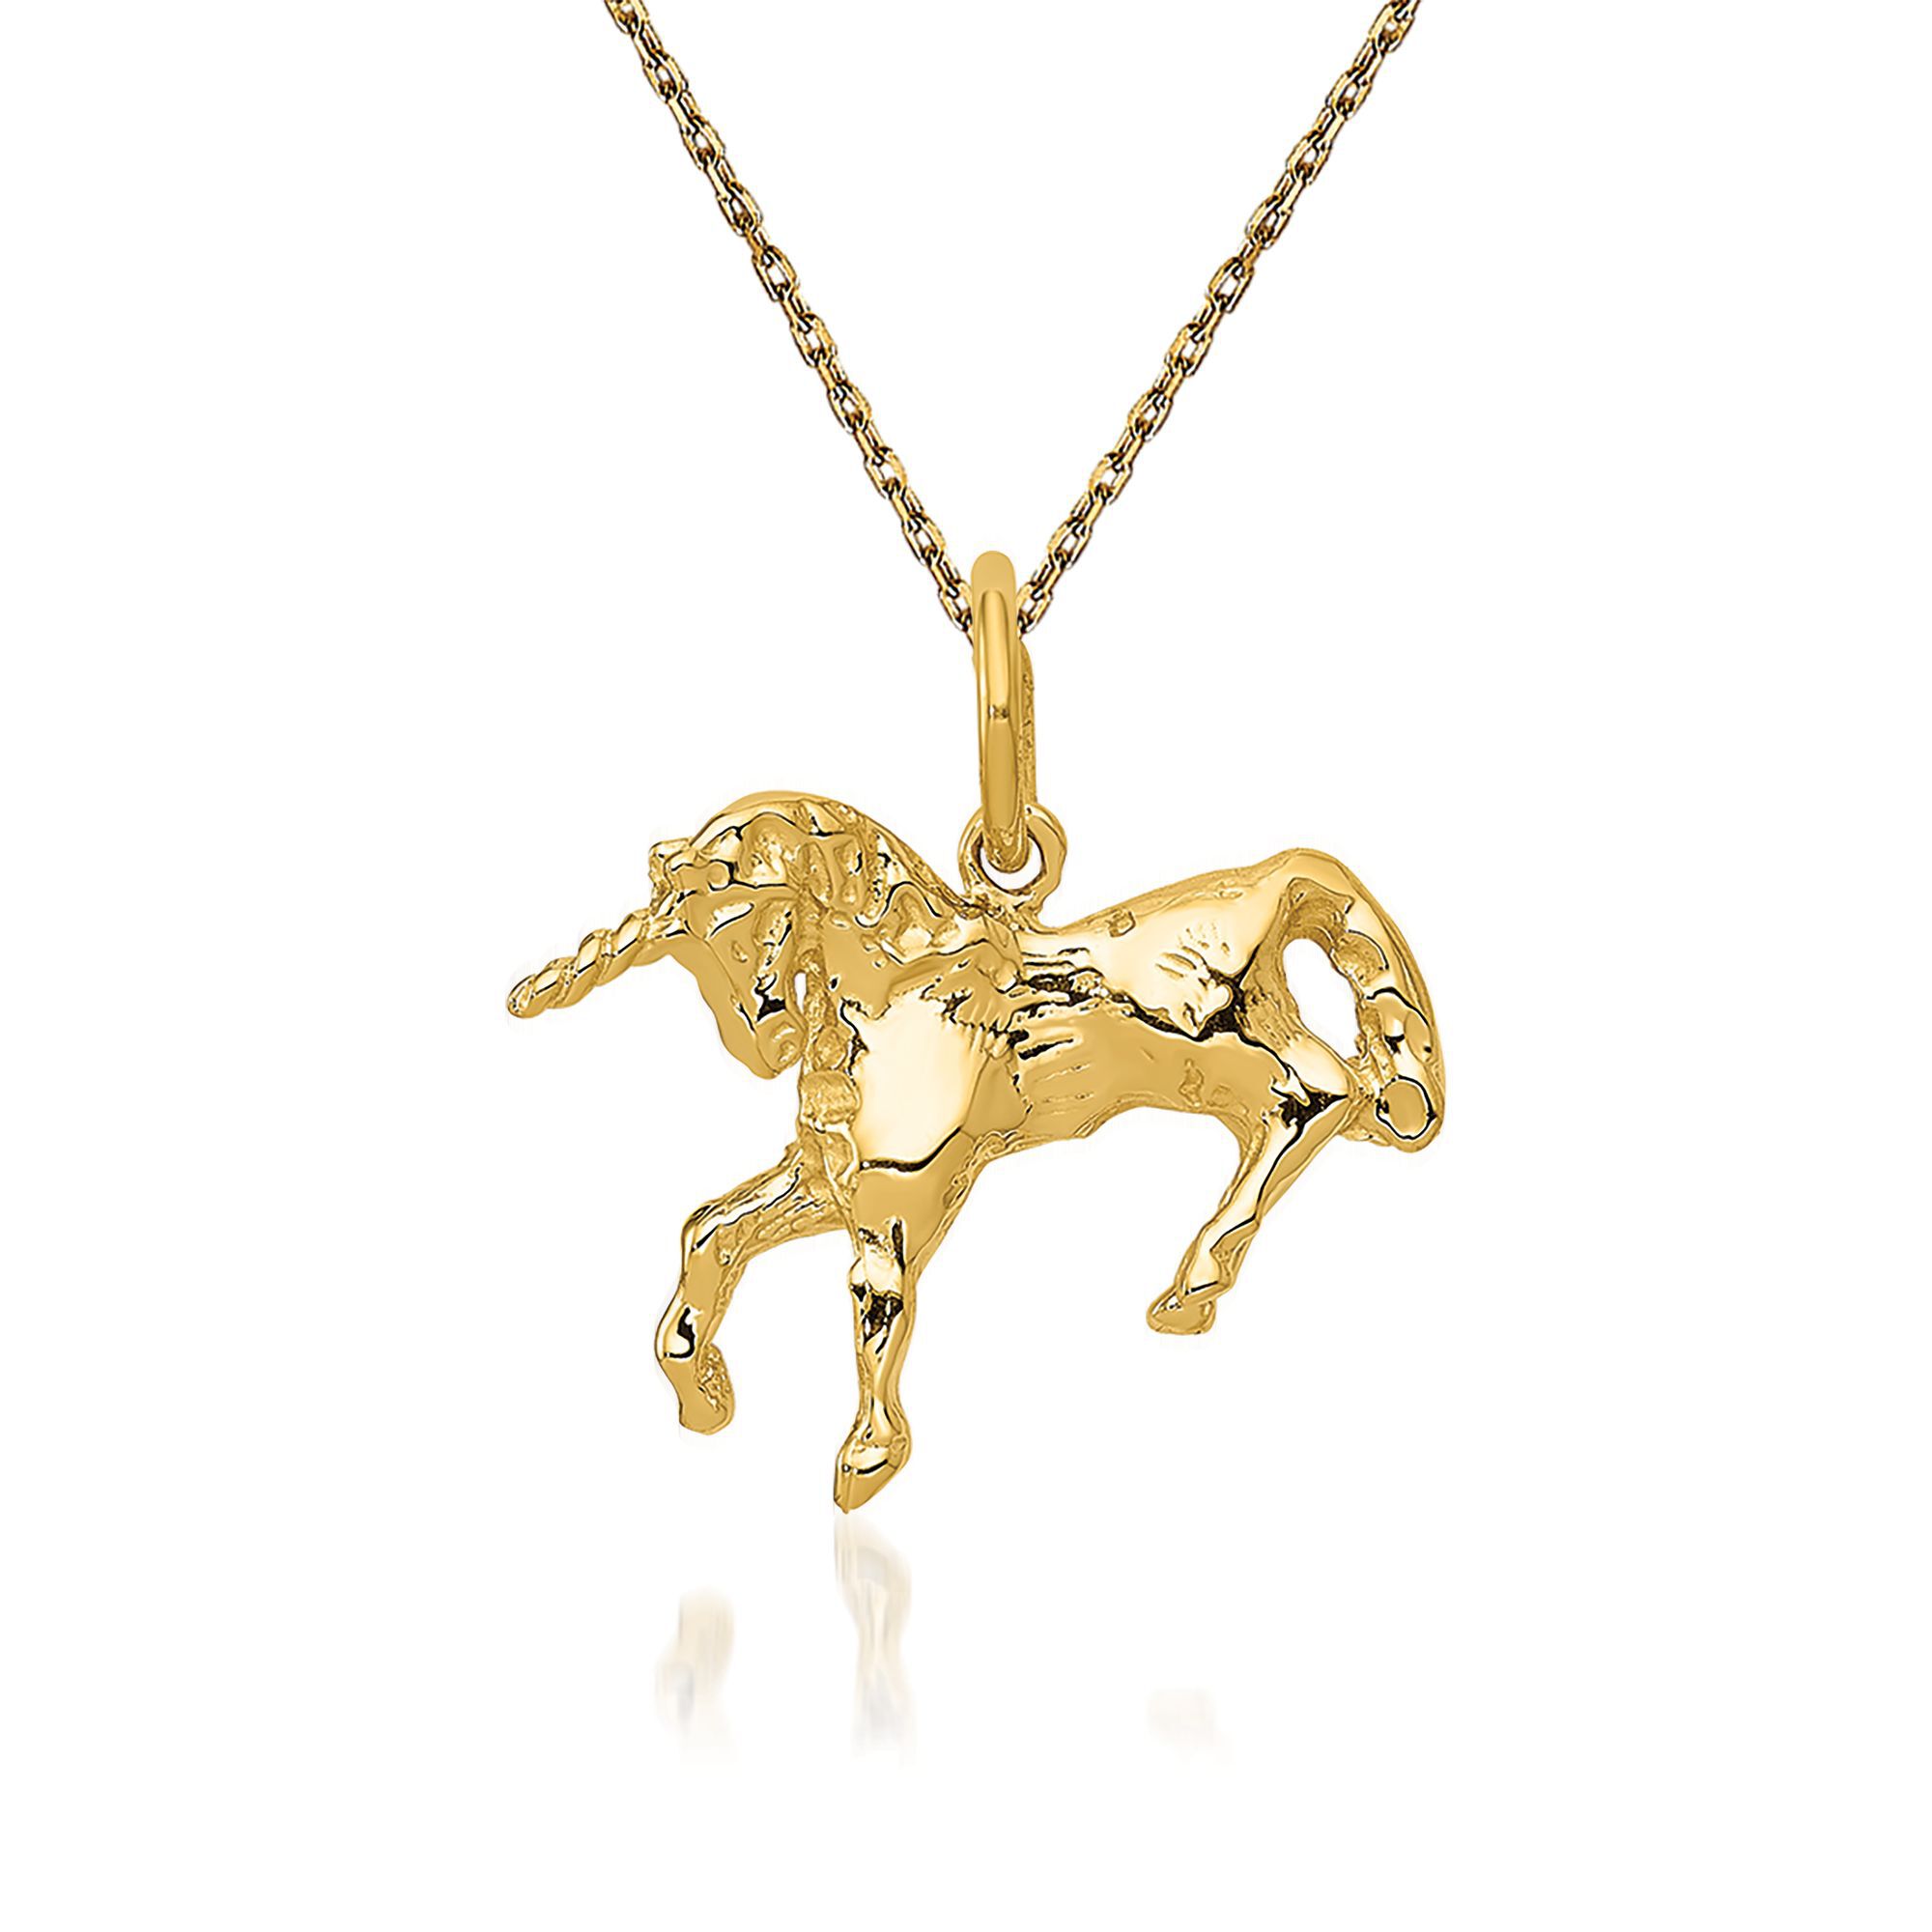 14K Yellow Gold Unicorns Pendant on an Adjustable 14K Yellow Gold Chain Necklace